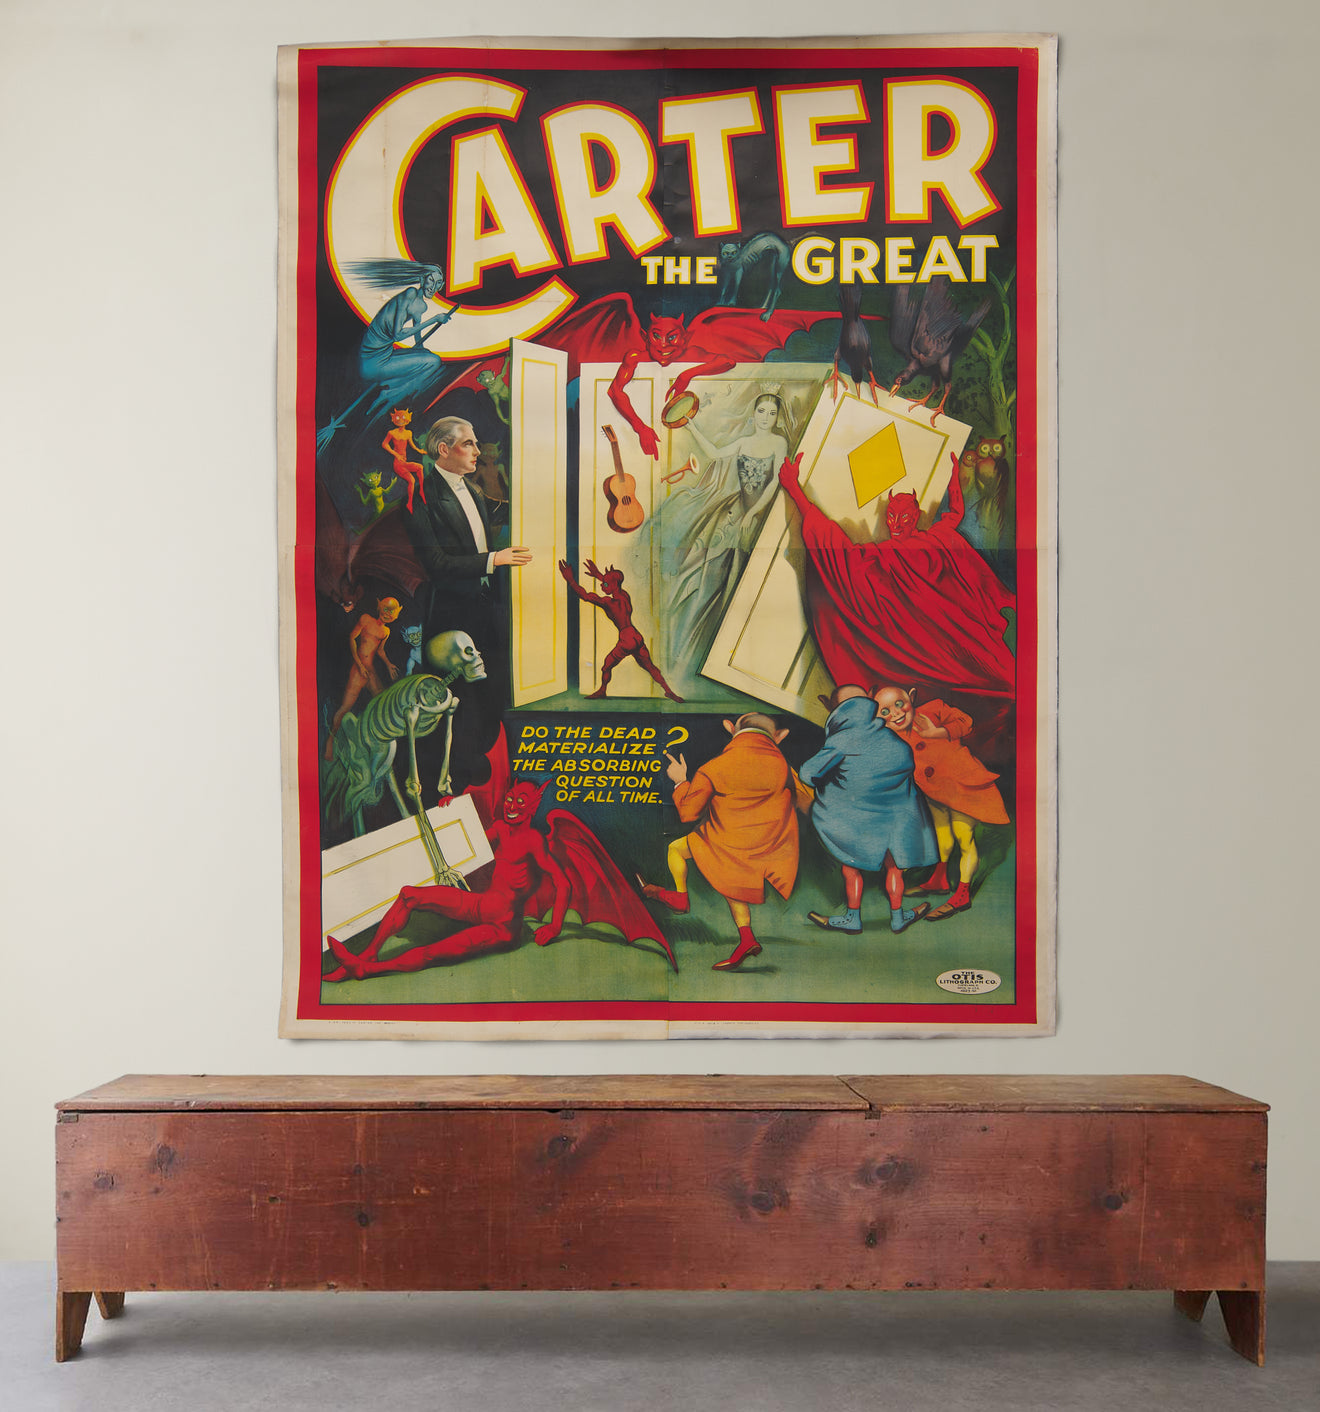 VINTAGE CARTER THE GREAT POSTER